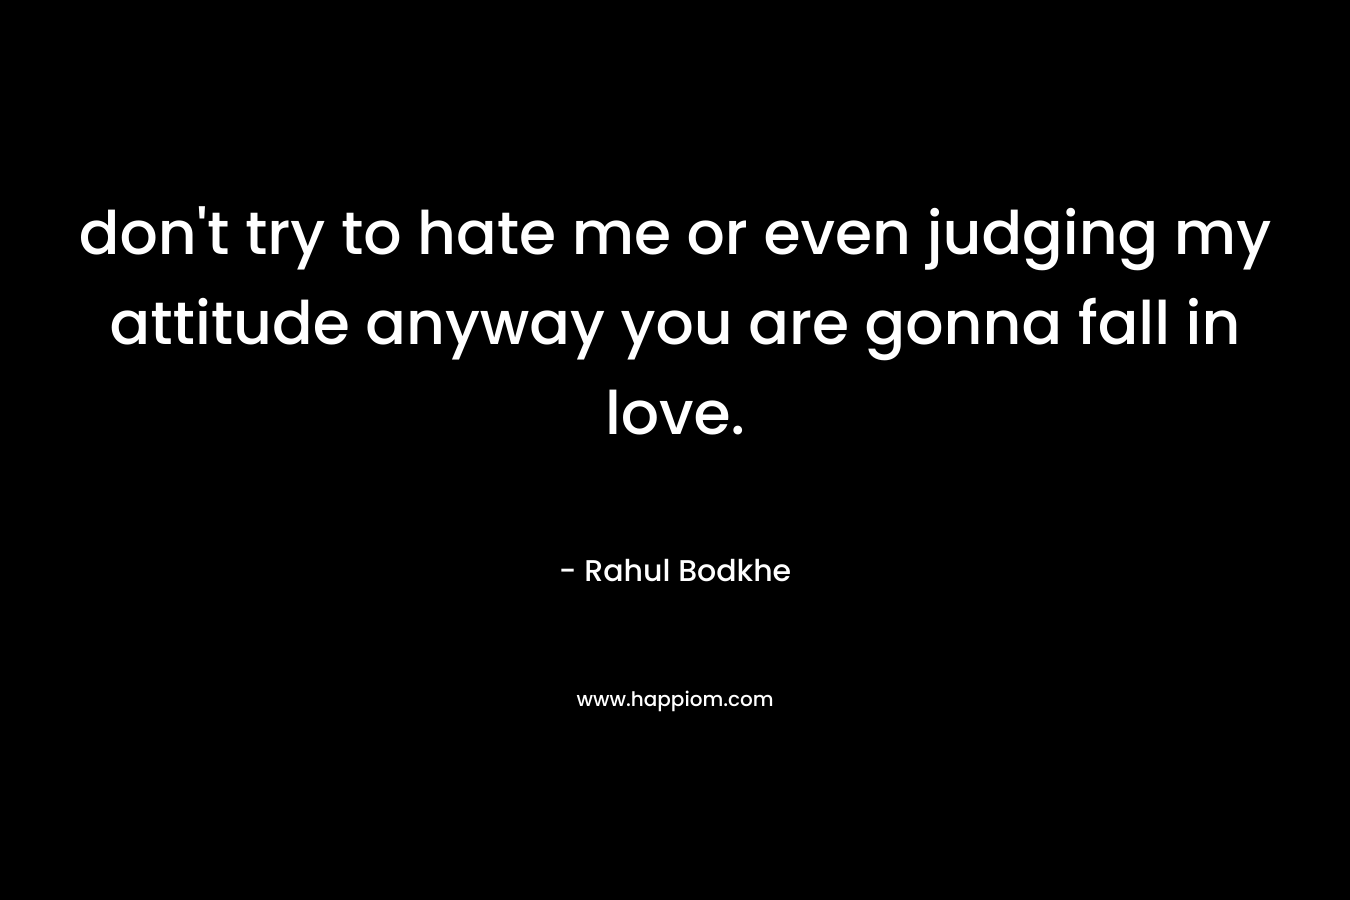 don't try to hate me or even judging my attitude anyway you are gonna fall in love.